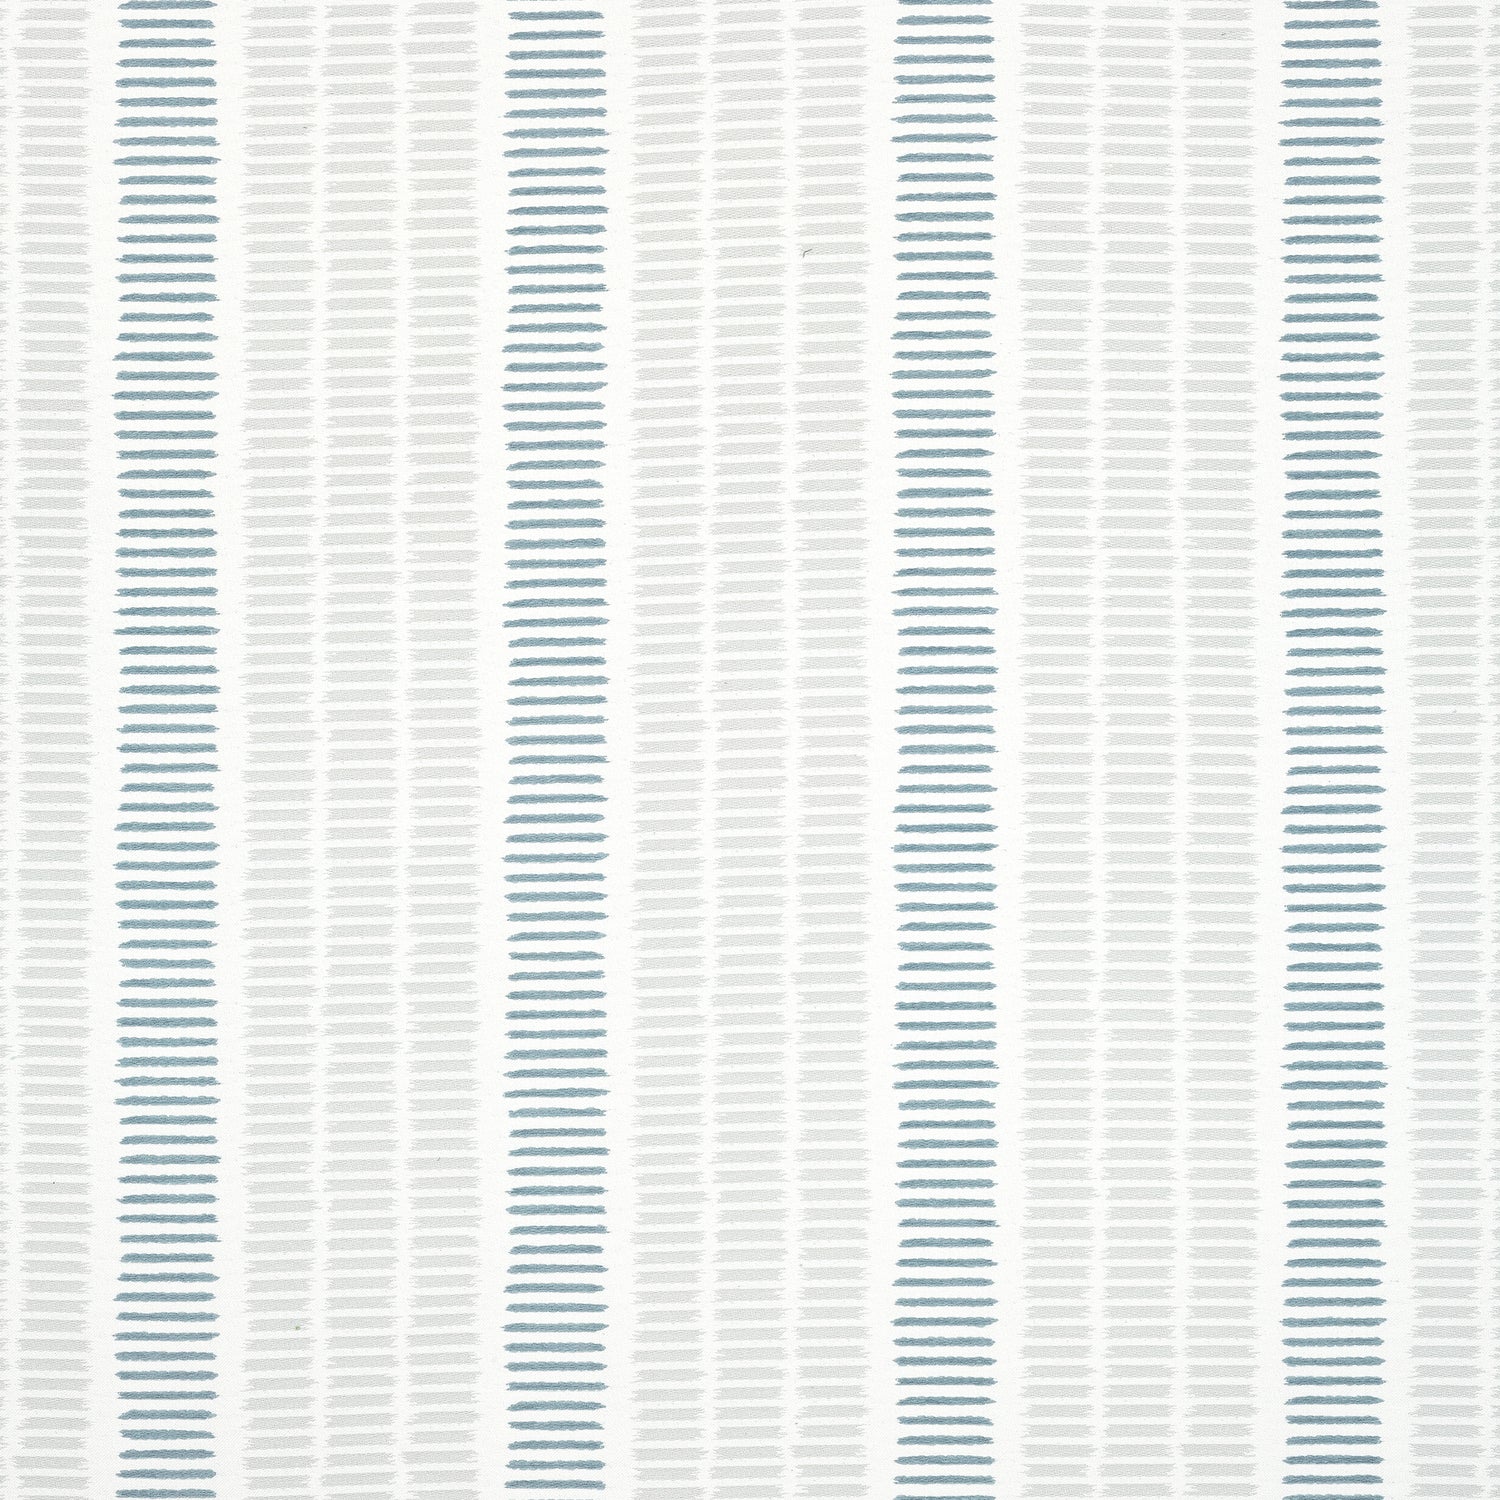 Topsail Stripe fabric in sterling and slate color - pattern number W73518 - by Thibaut in the Landmark collection